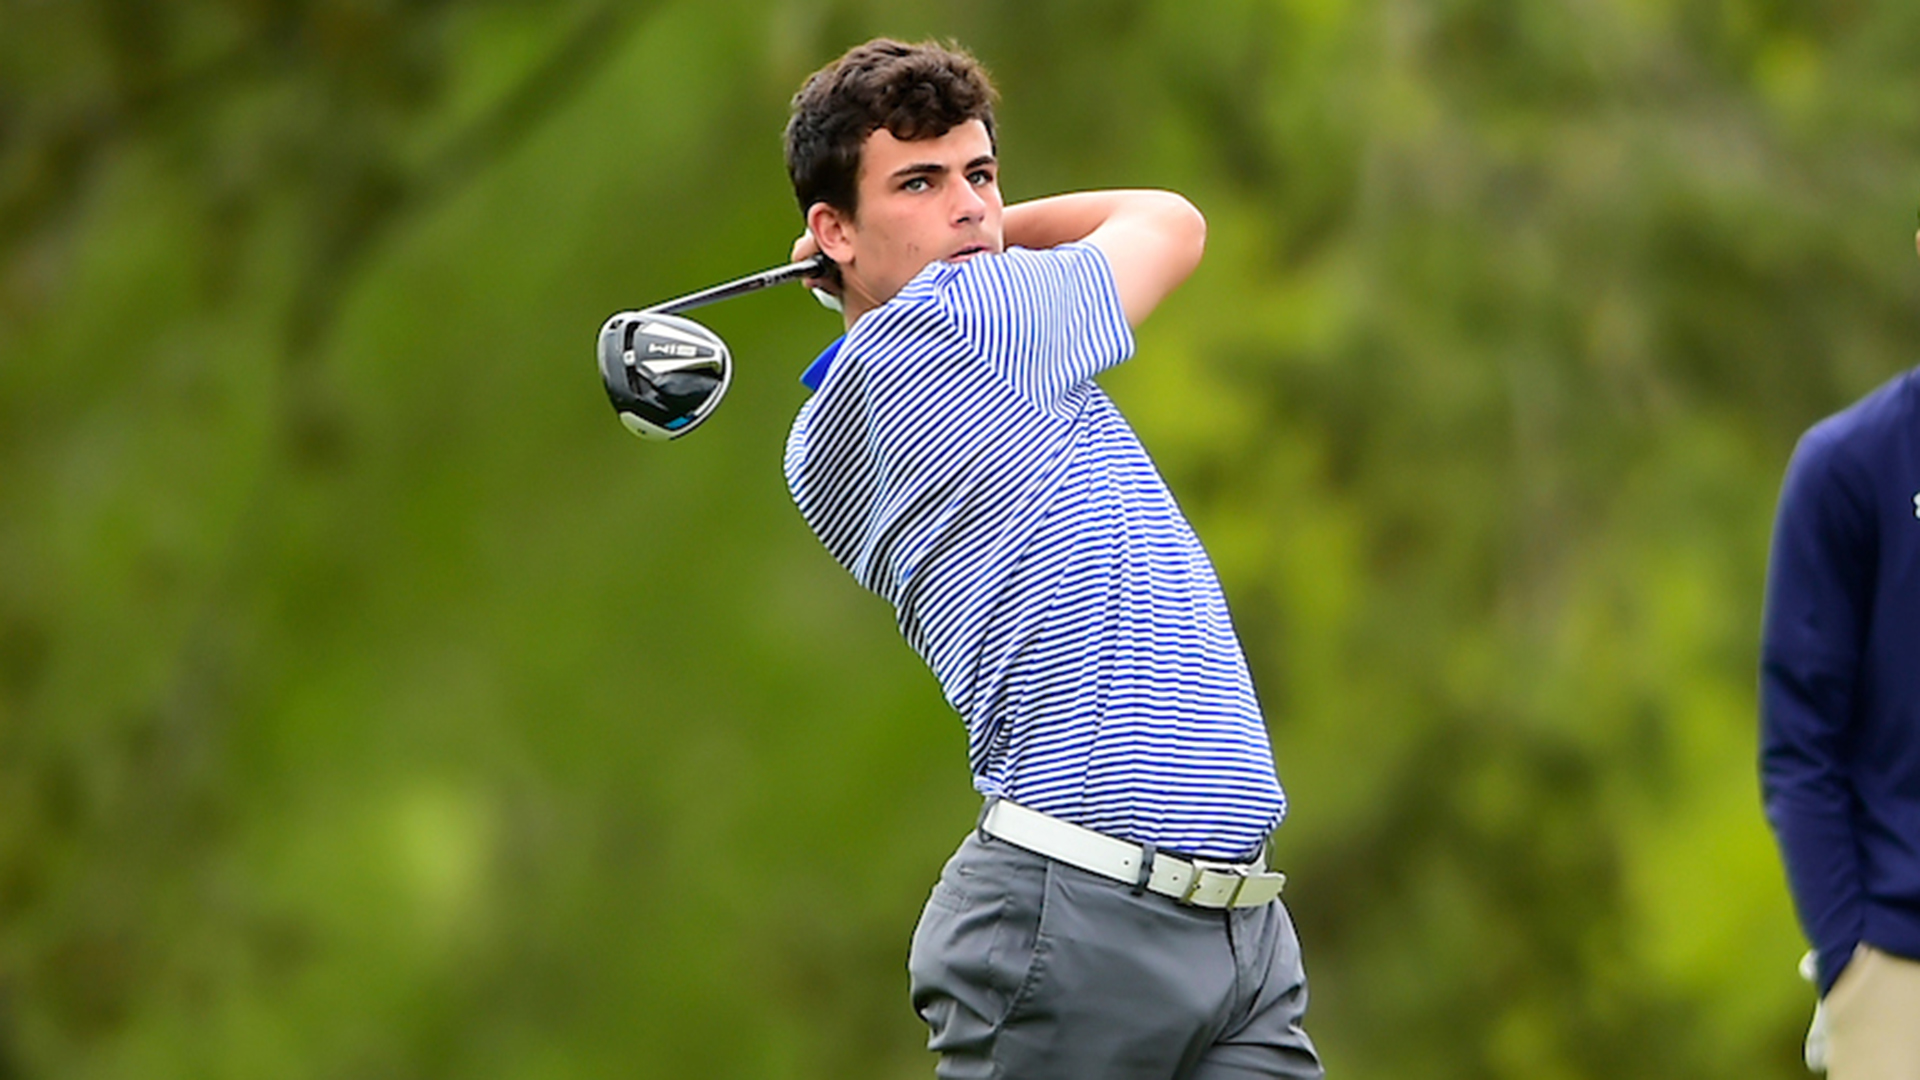 F&M's Berlin Places 40th at NCAA Men's Golf Championship